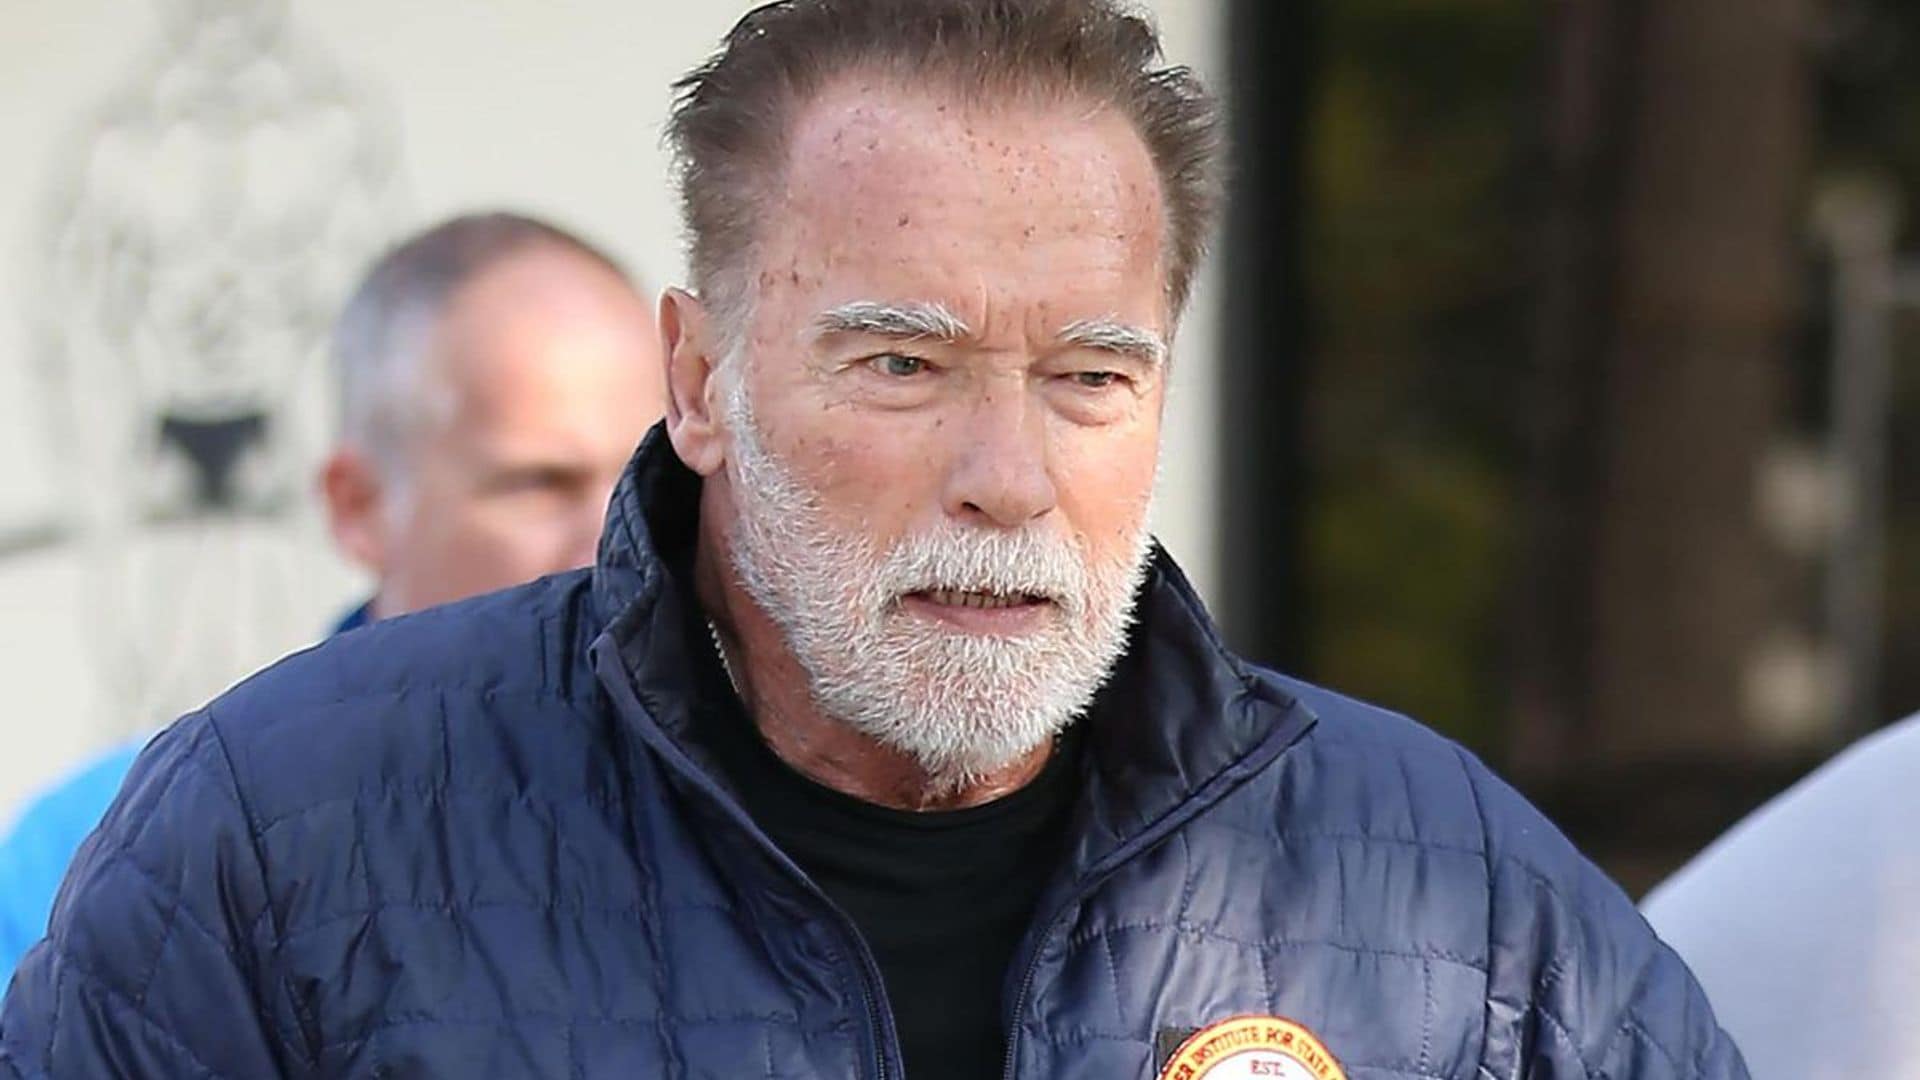 Arnold Schwarzenegger reveals he’s recovering from surgery